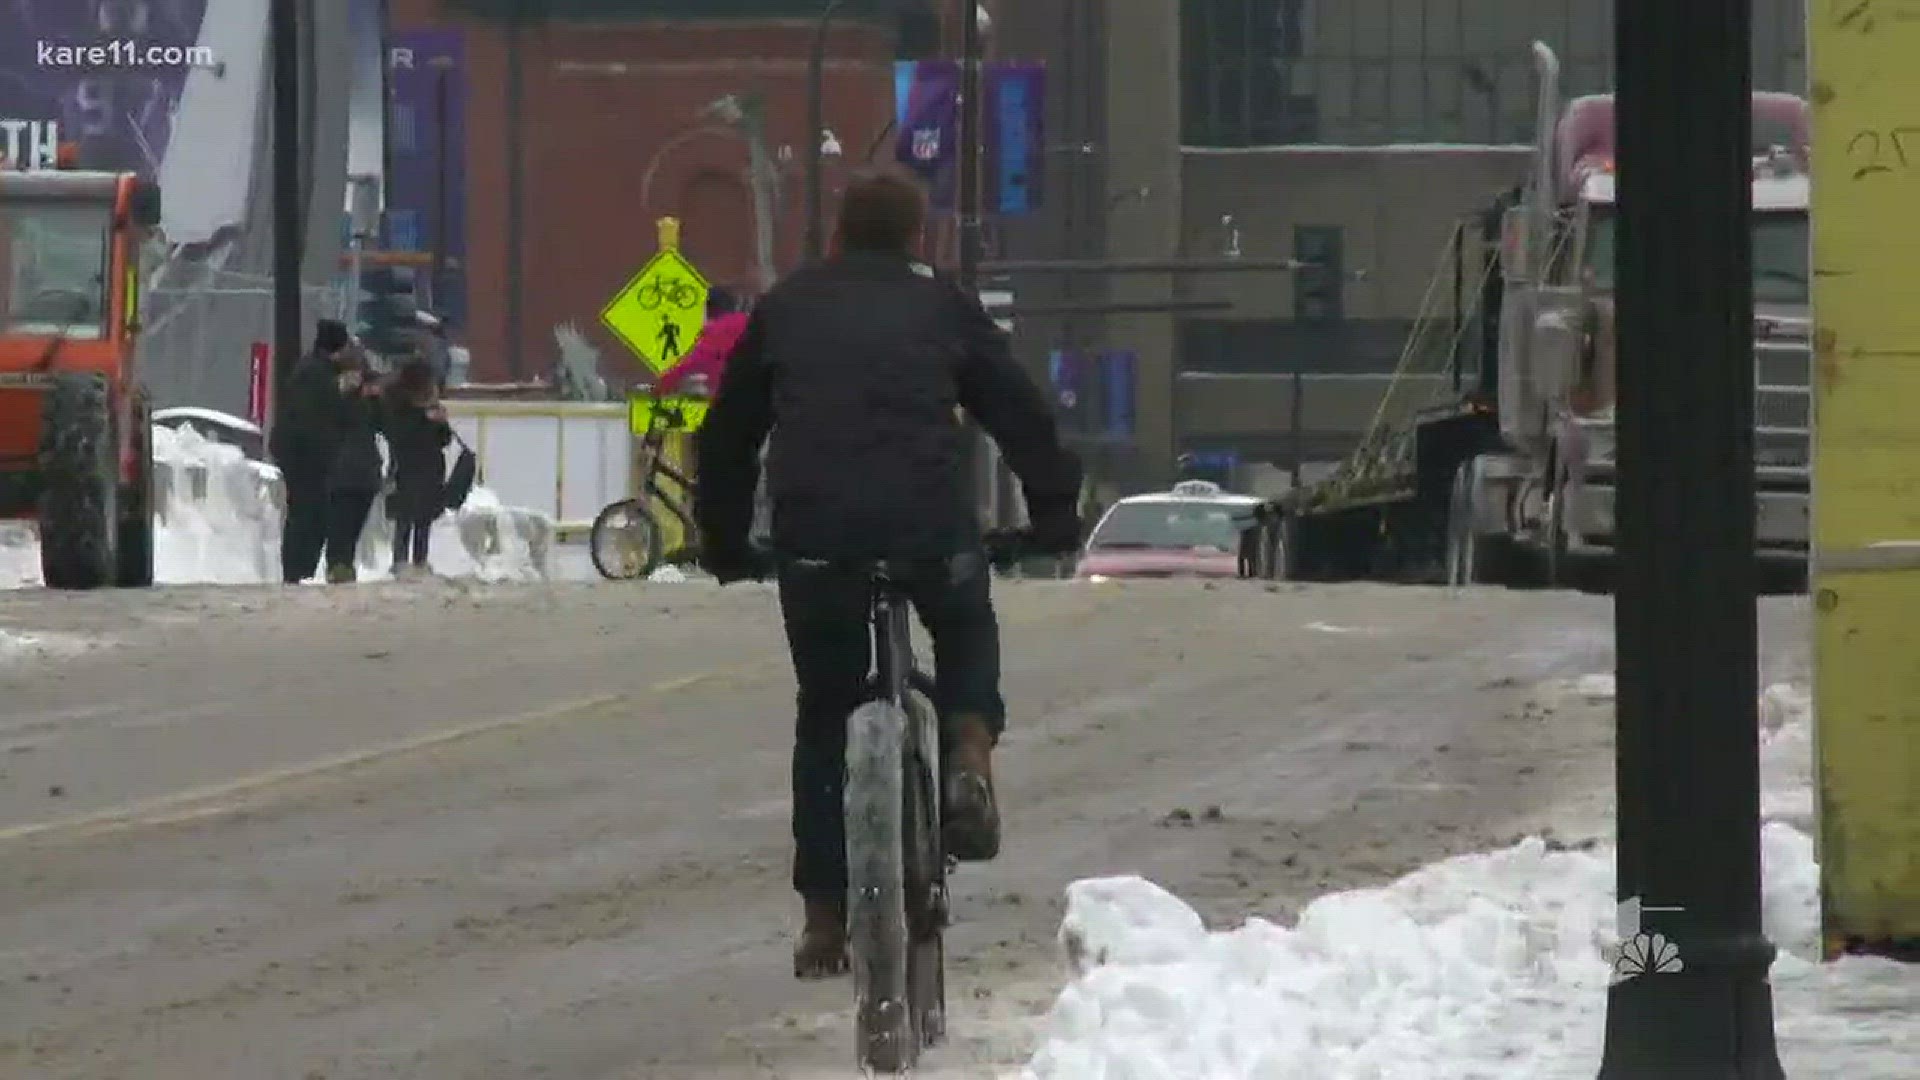 A temporary bike-share system will be in place during the Super Bowl to help visitors and residents get around. http://kare11.tv/2Fcl7bq